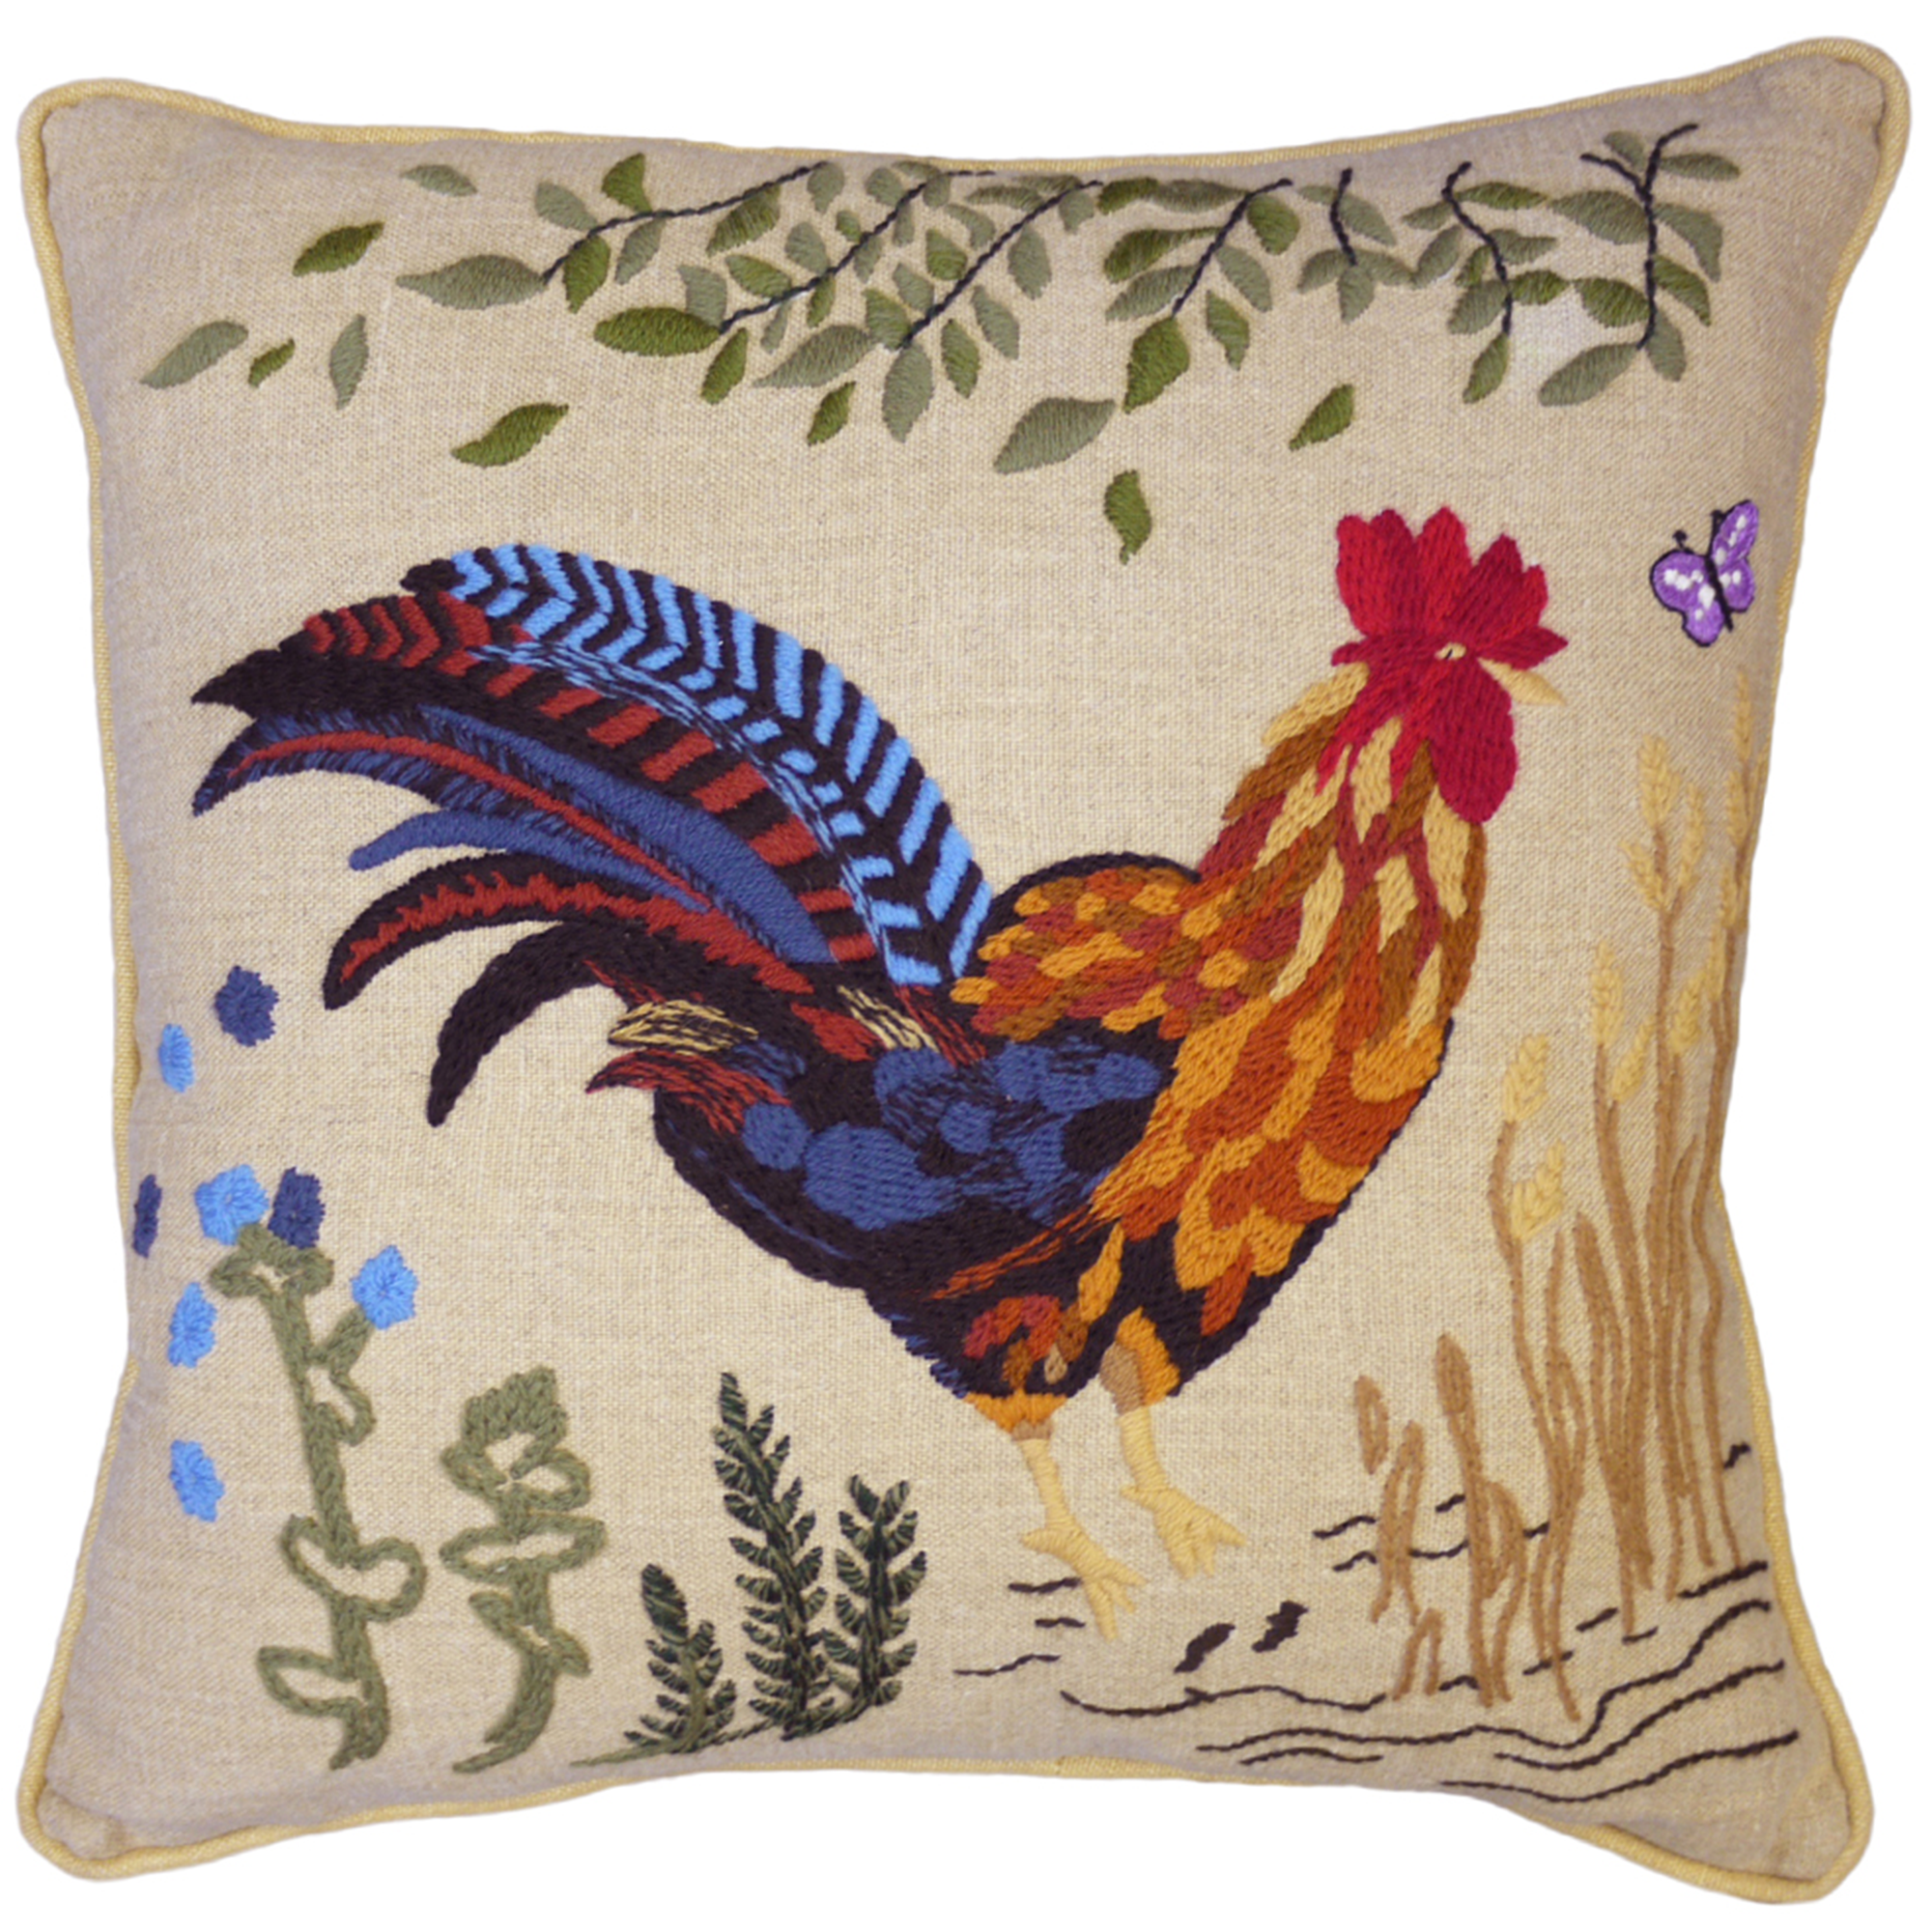 Embroidered Cockerel Cushion Made To Order